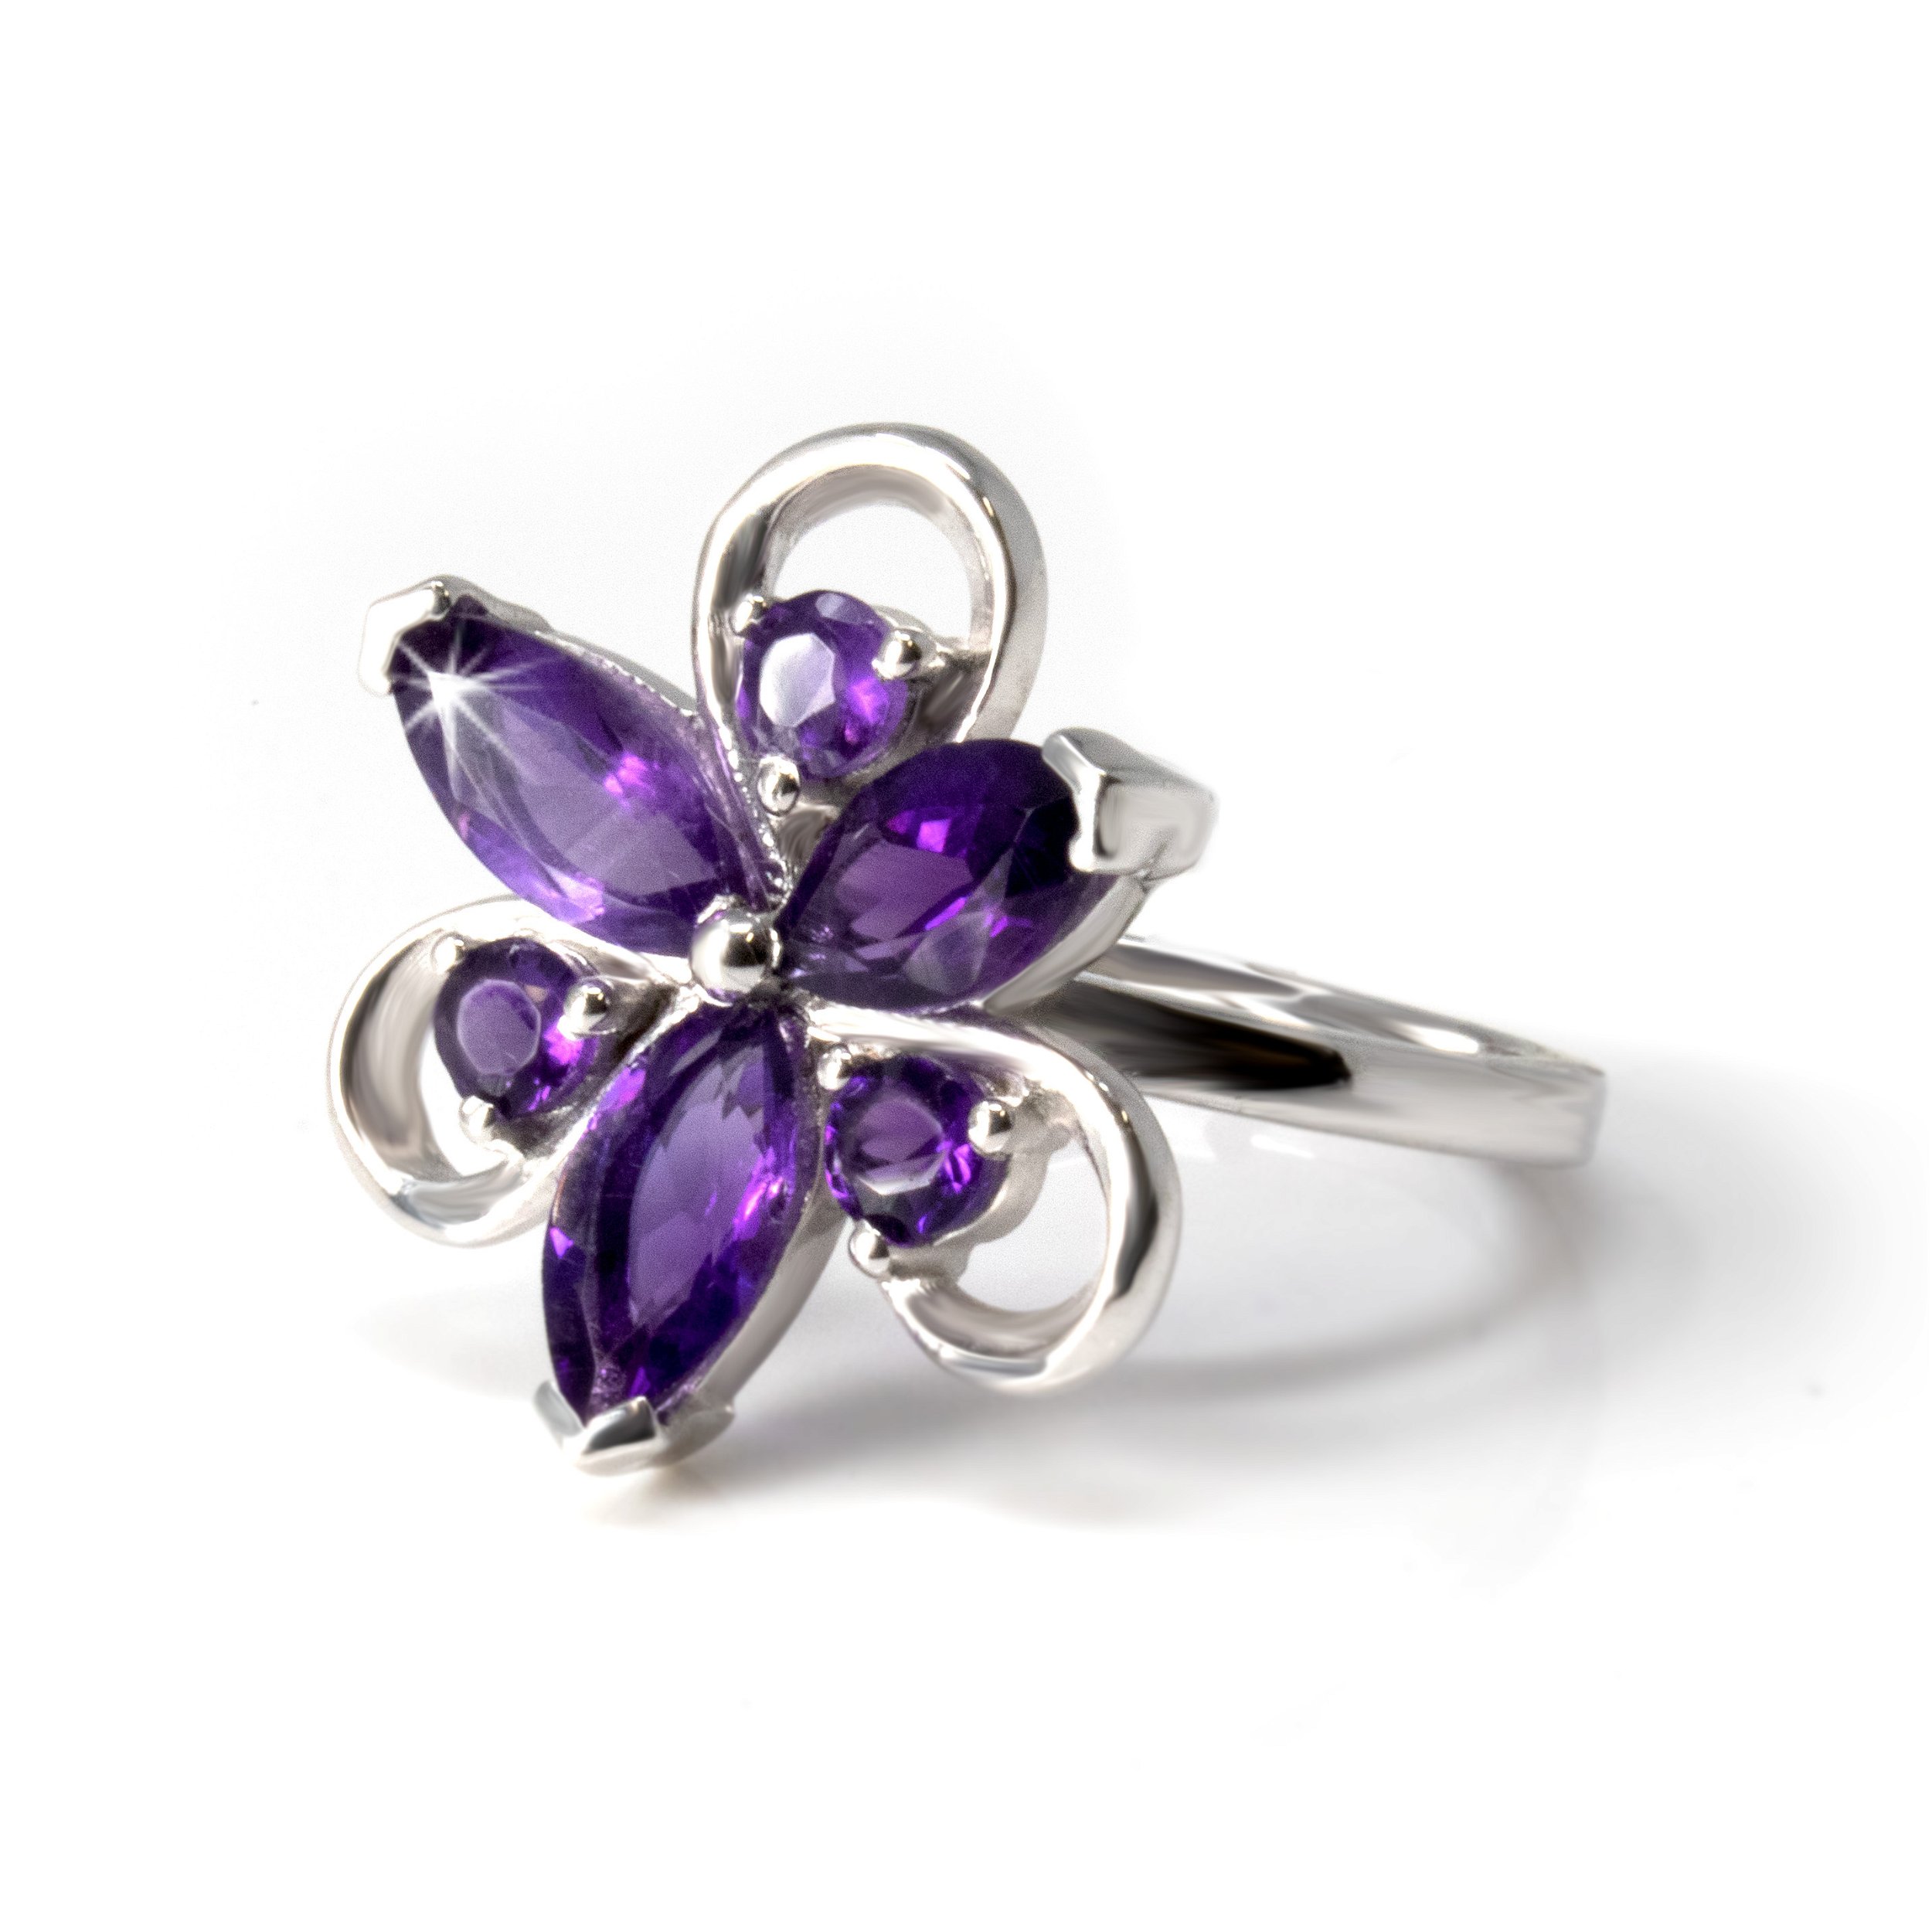 Faceted Amethyst Ring Size 7 - with 3 Faceted Sharp Ovals & 3 Faceted Rounds With Silver Loop Detail - Water Lily Shape - Prong Set